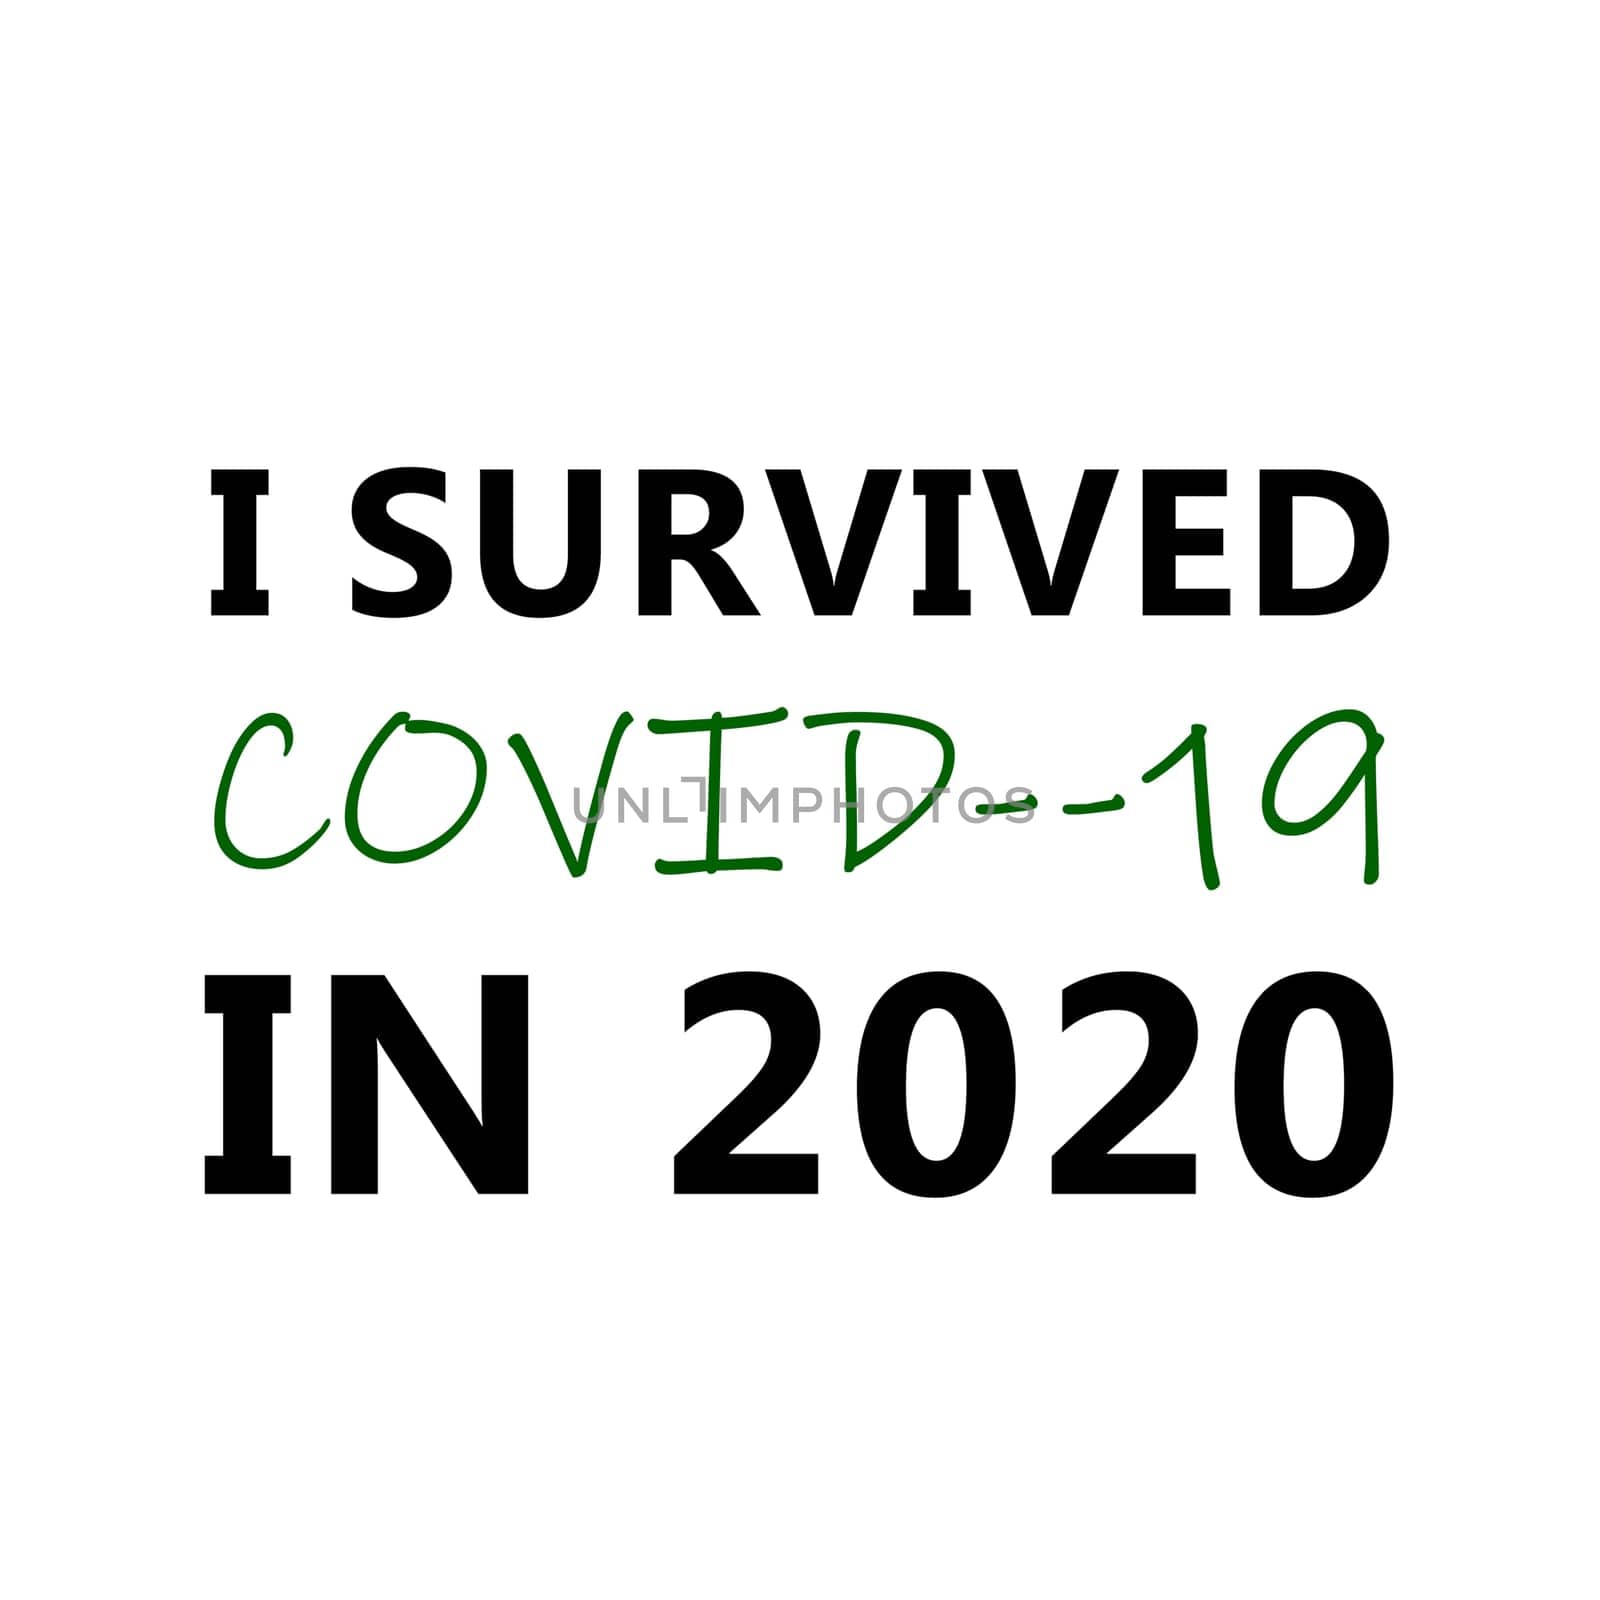 i Survived the Covid-19 in 2020